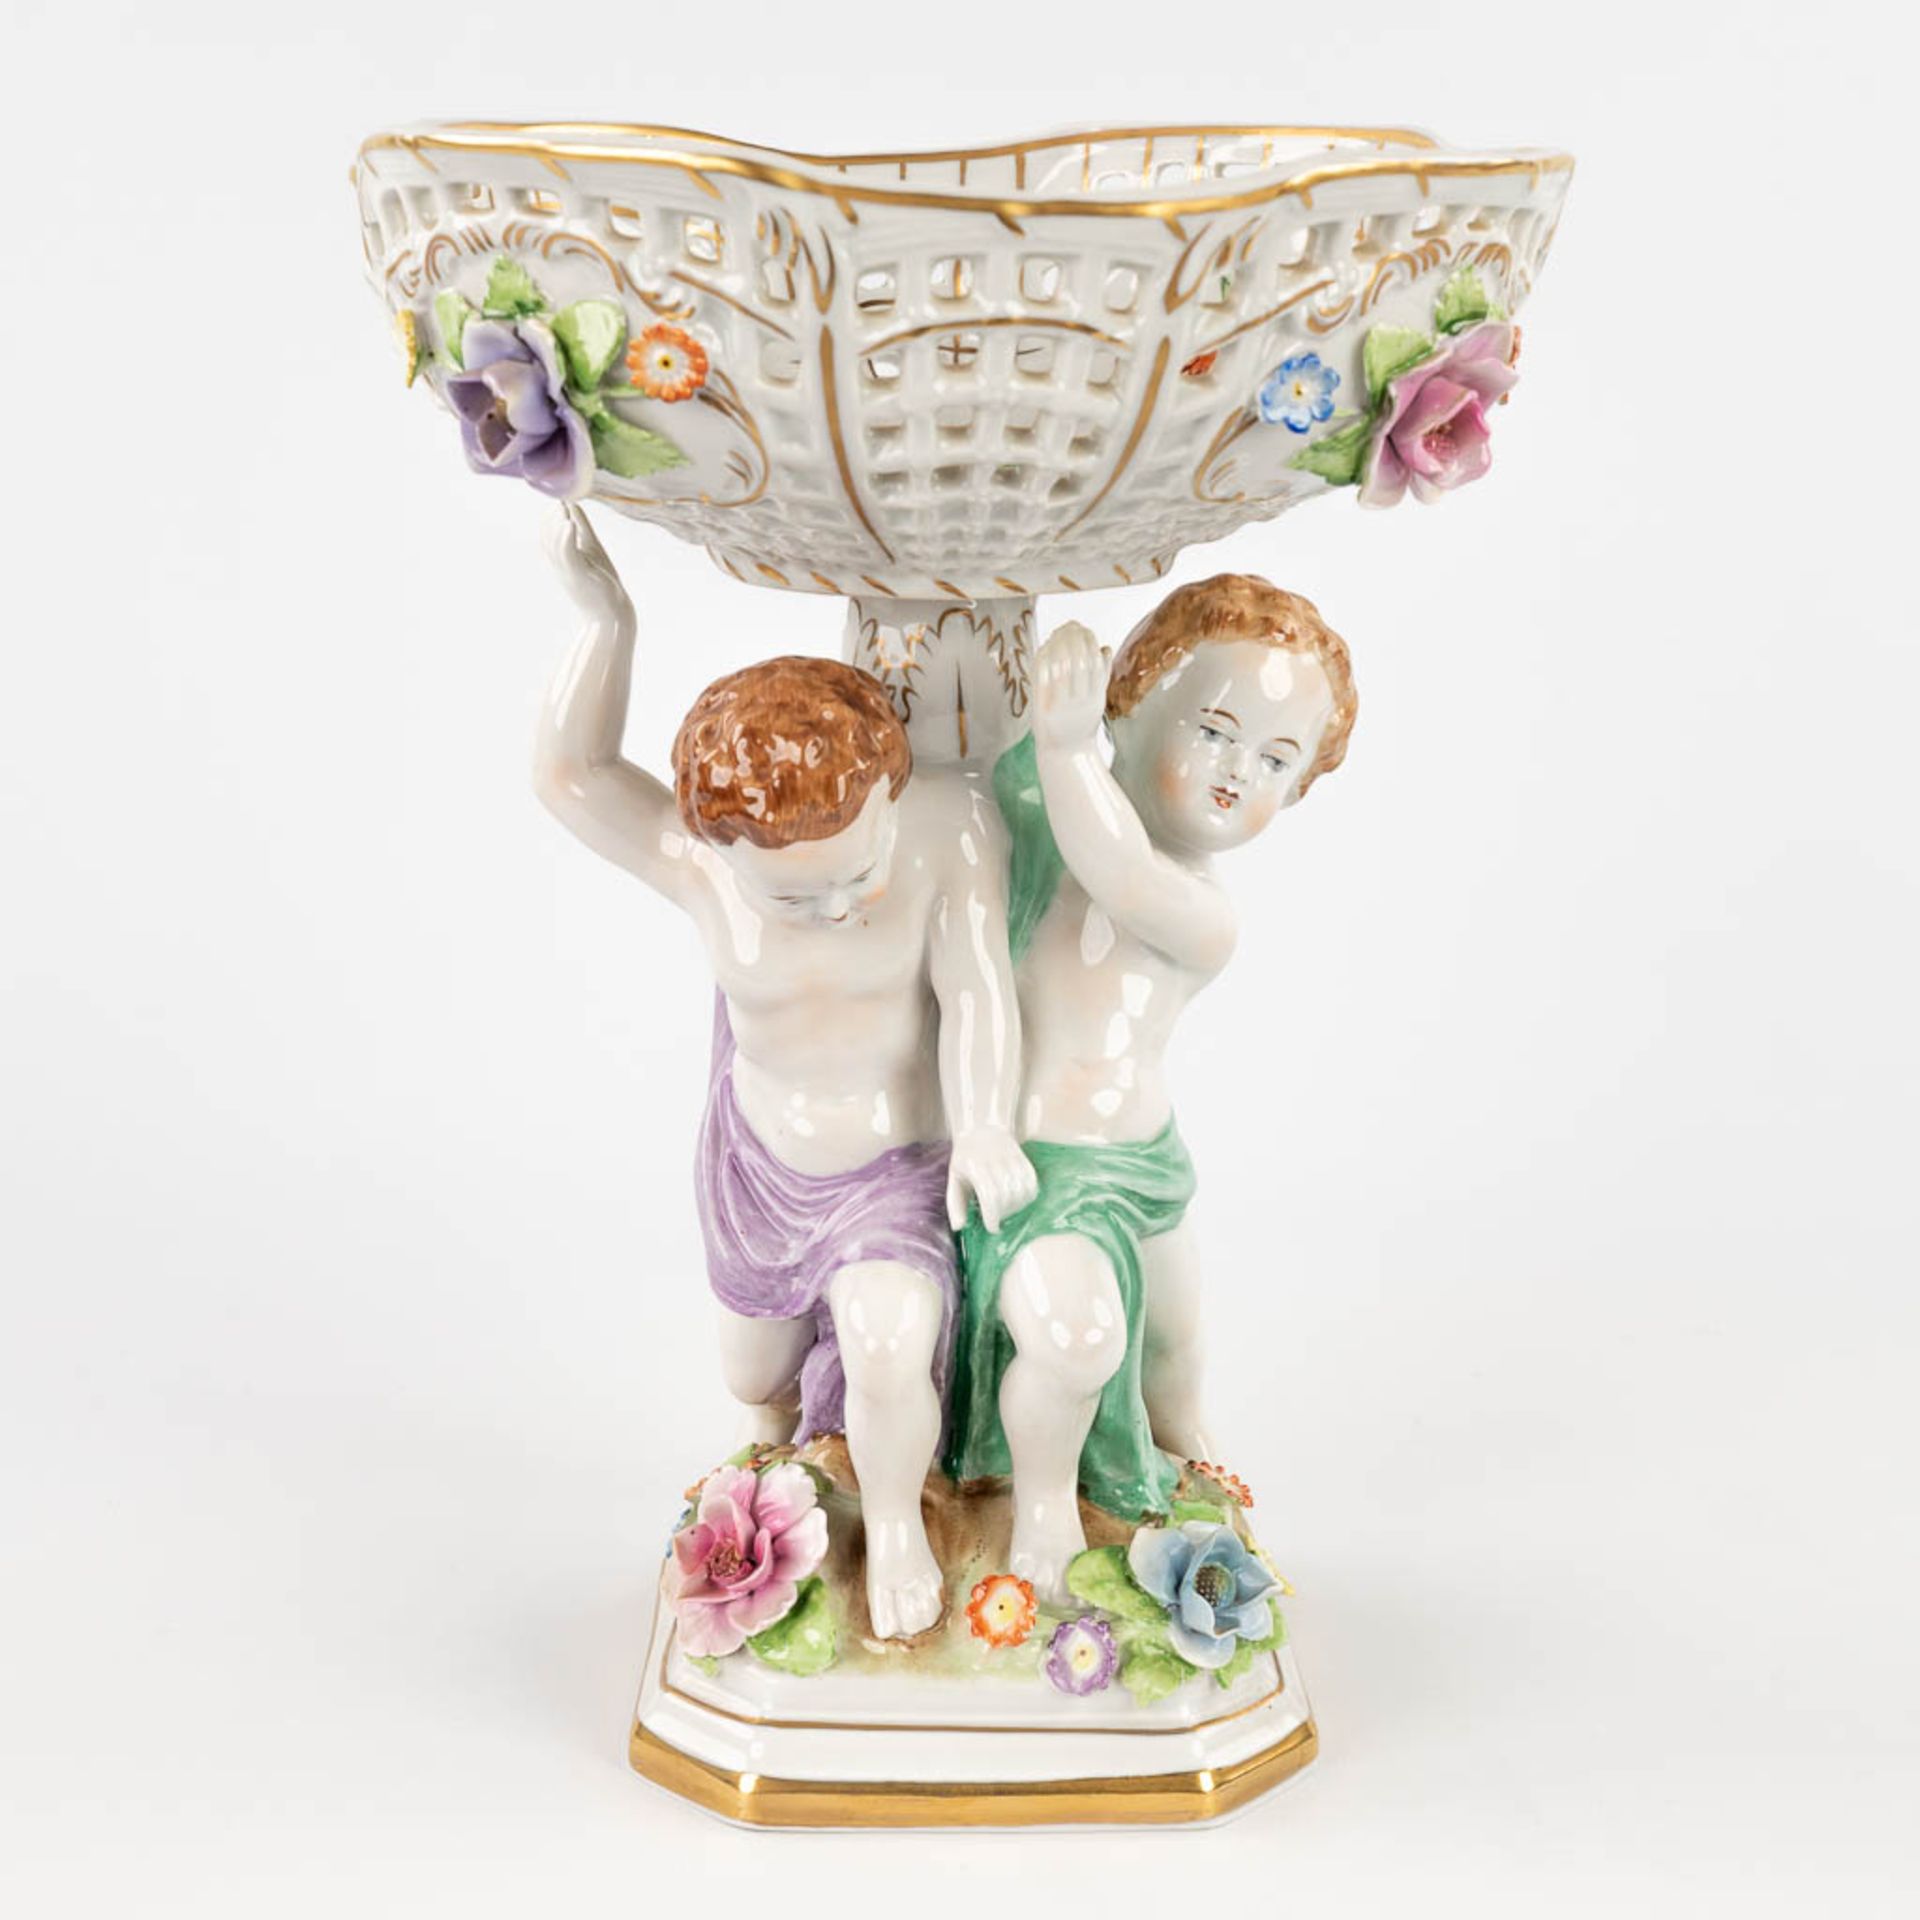 Plaue Schierholz 1817, a porcelain tazza decorated with boys holding up a basket. 20th C. (L: 19 x W